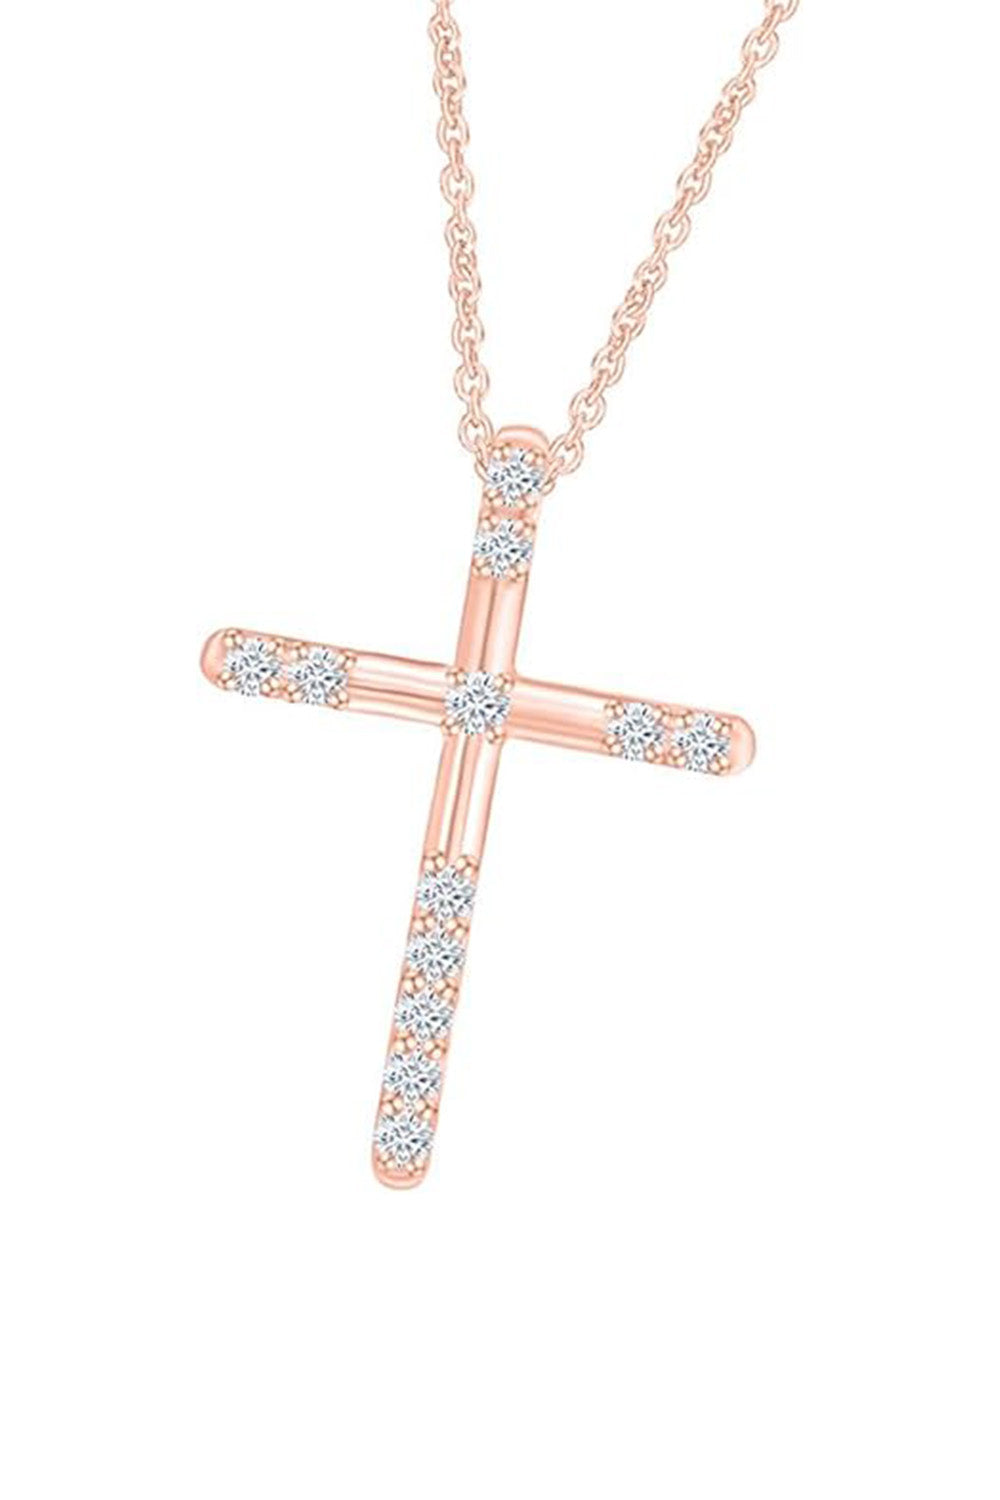 Rose Gold Color Cross Pendant Necklace for Women, Fashion Jewellery